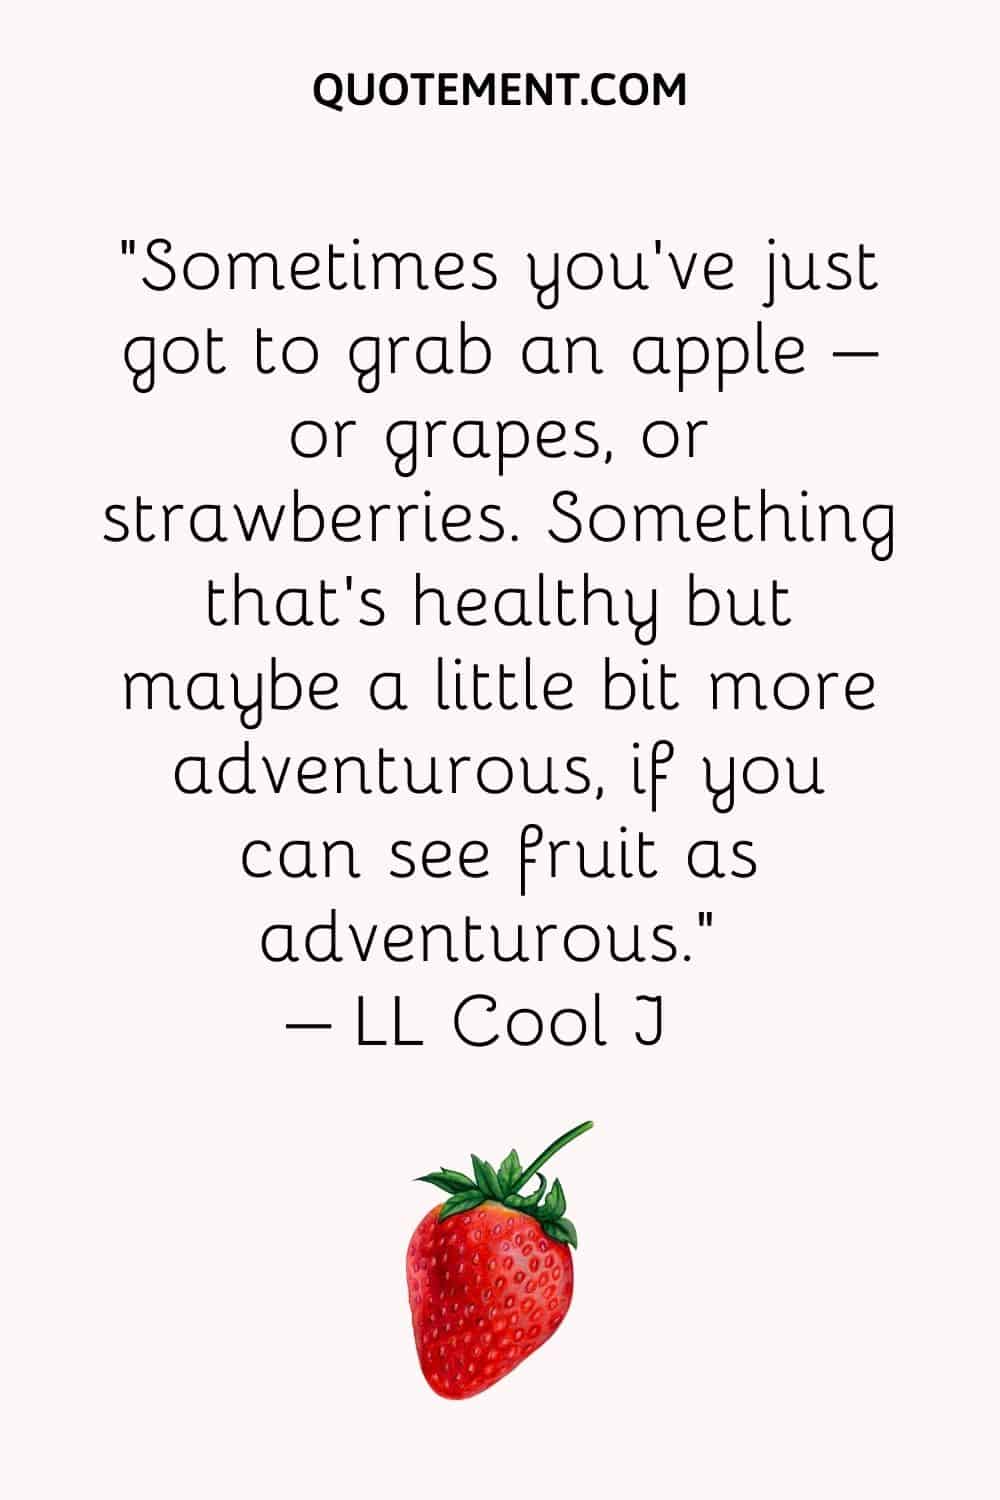 Sometimes you’ve just got to grab an apple – or grapes, or strawberries